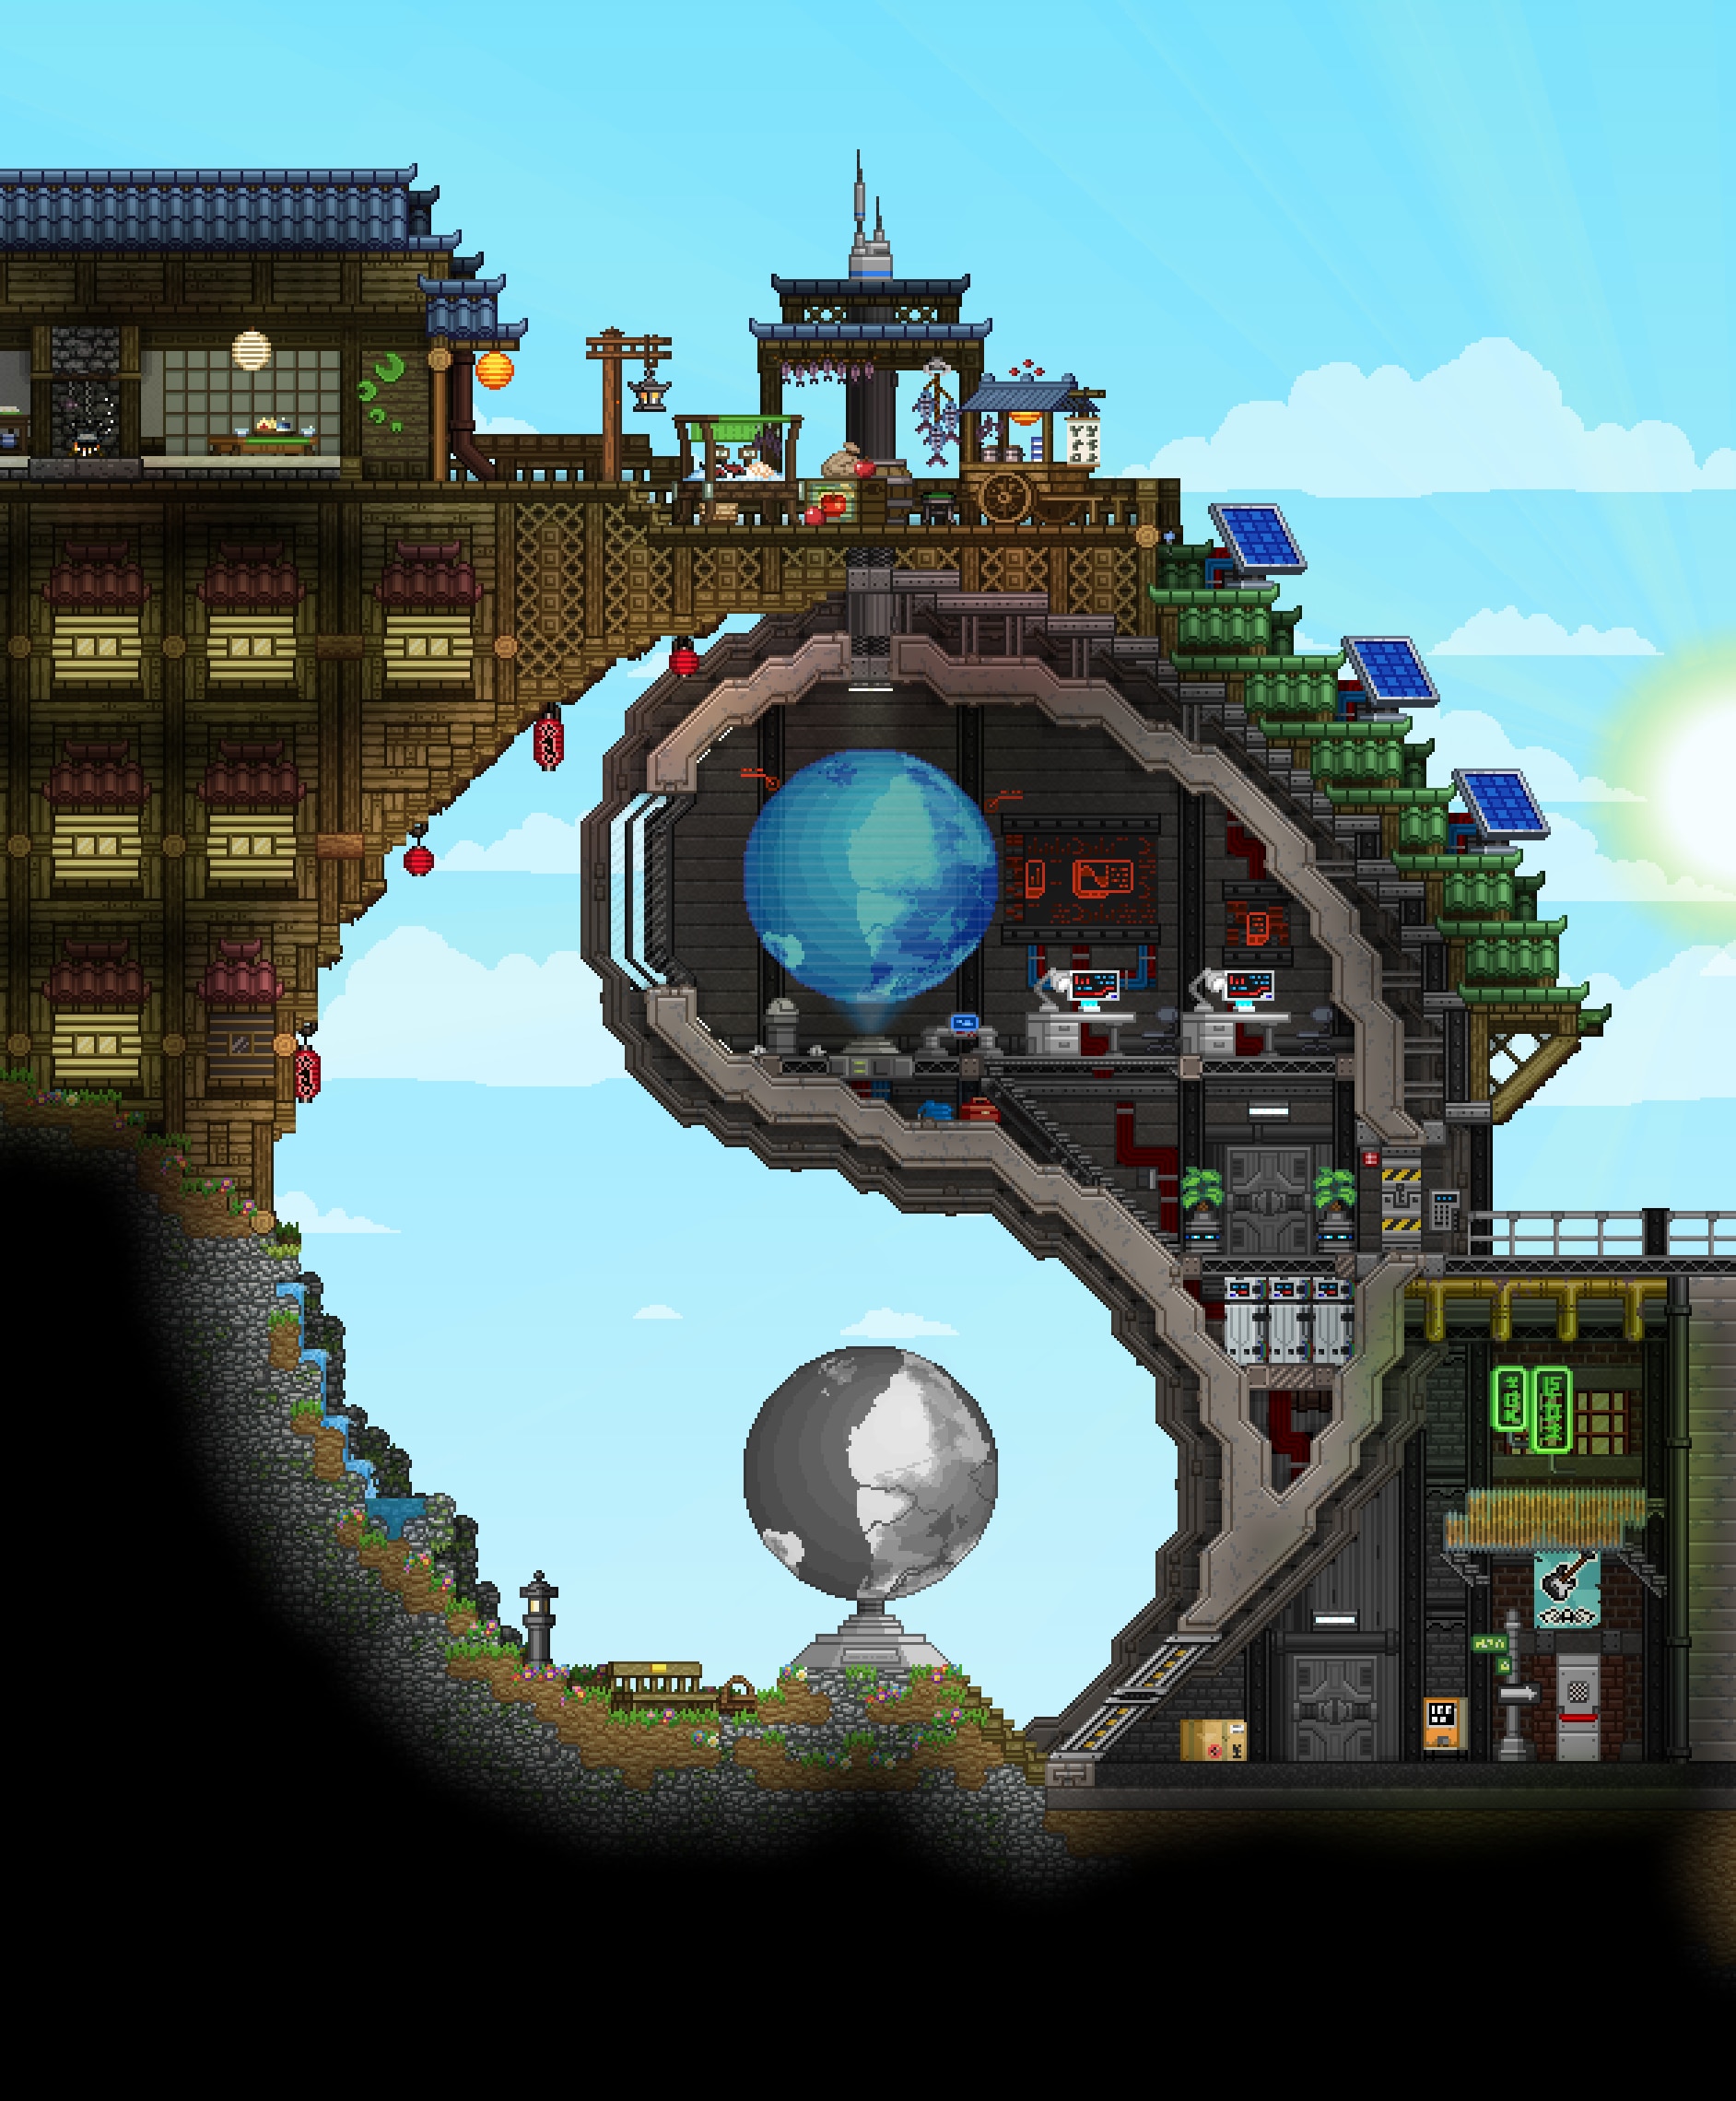 new to terraria (not just the mod I mean the game) just beat mech